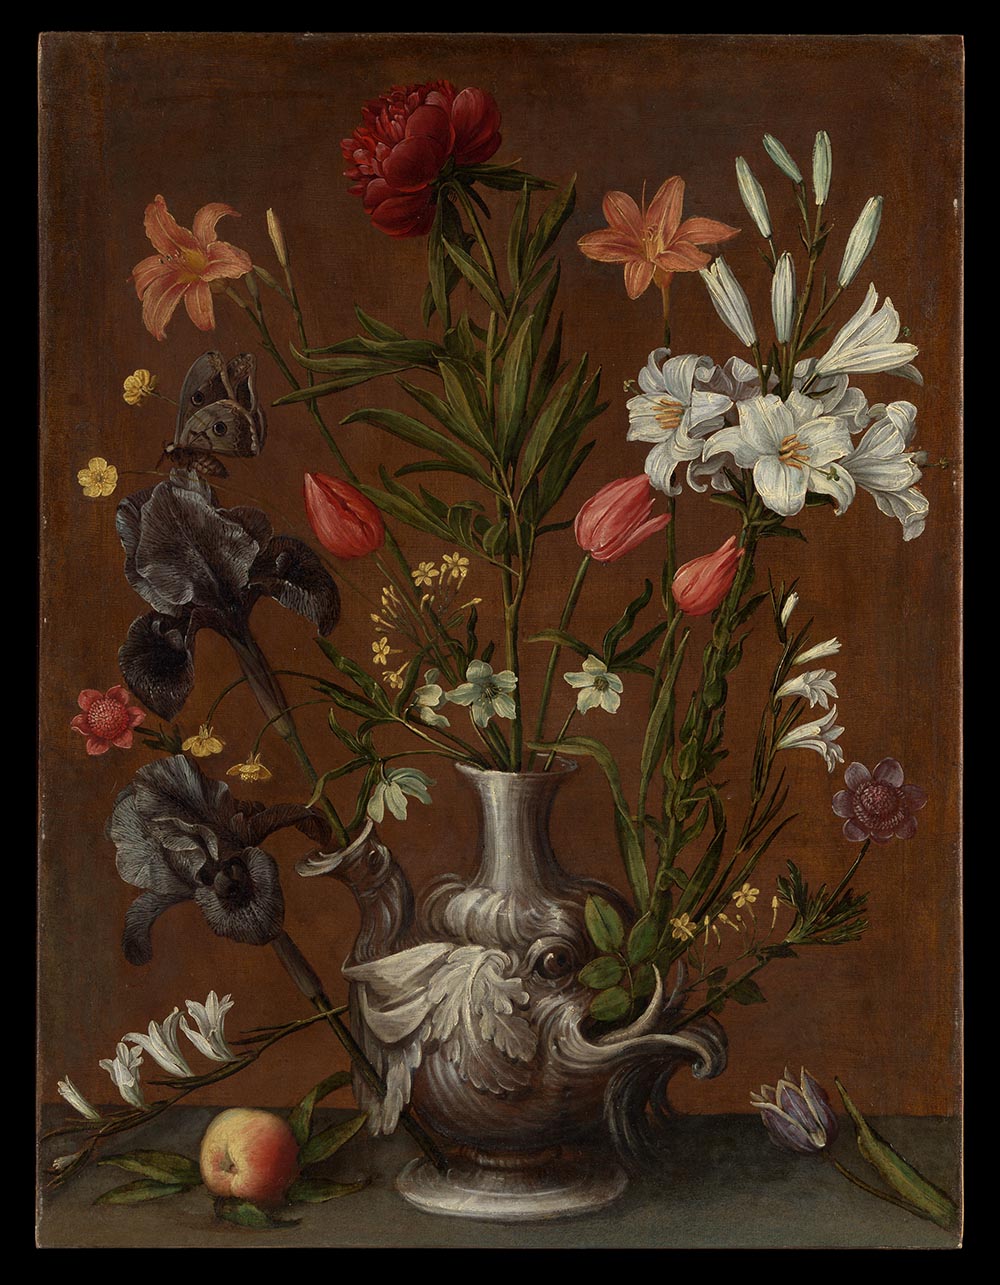  Caccia, Orsola Maddalena. 1635. Flowers in a Grotesque Vase [Oil on canvas]. The Metropolitan Museum of Art, New York, NY, USA. 